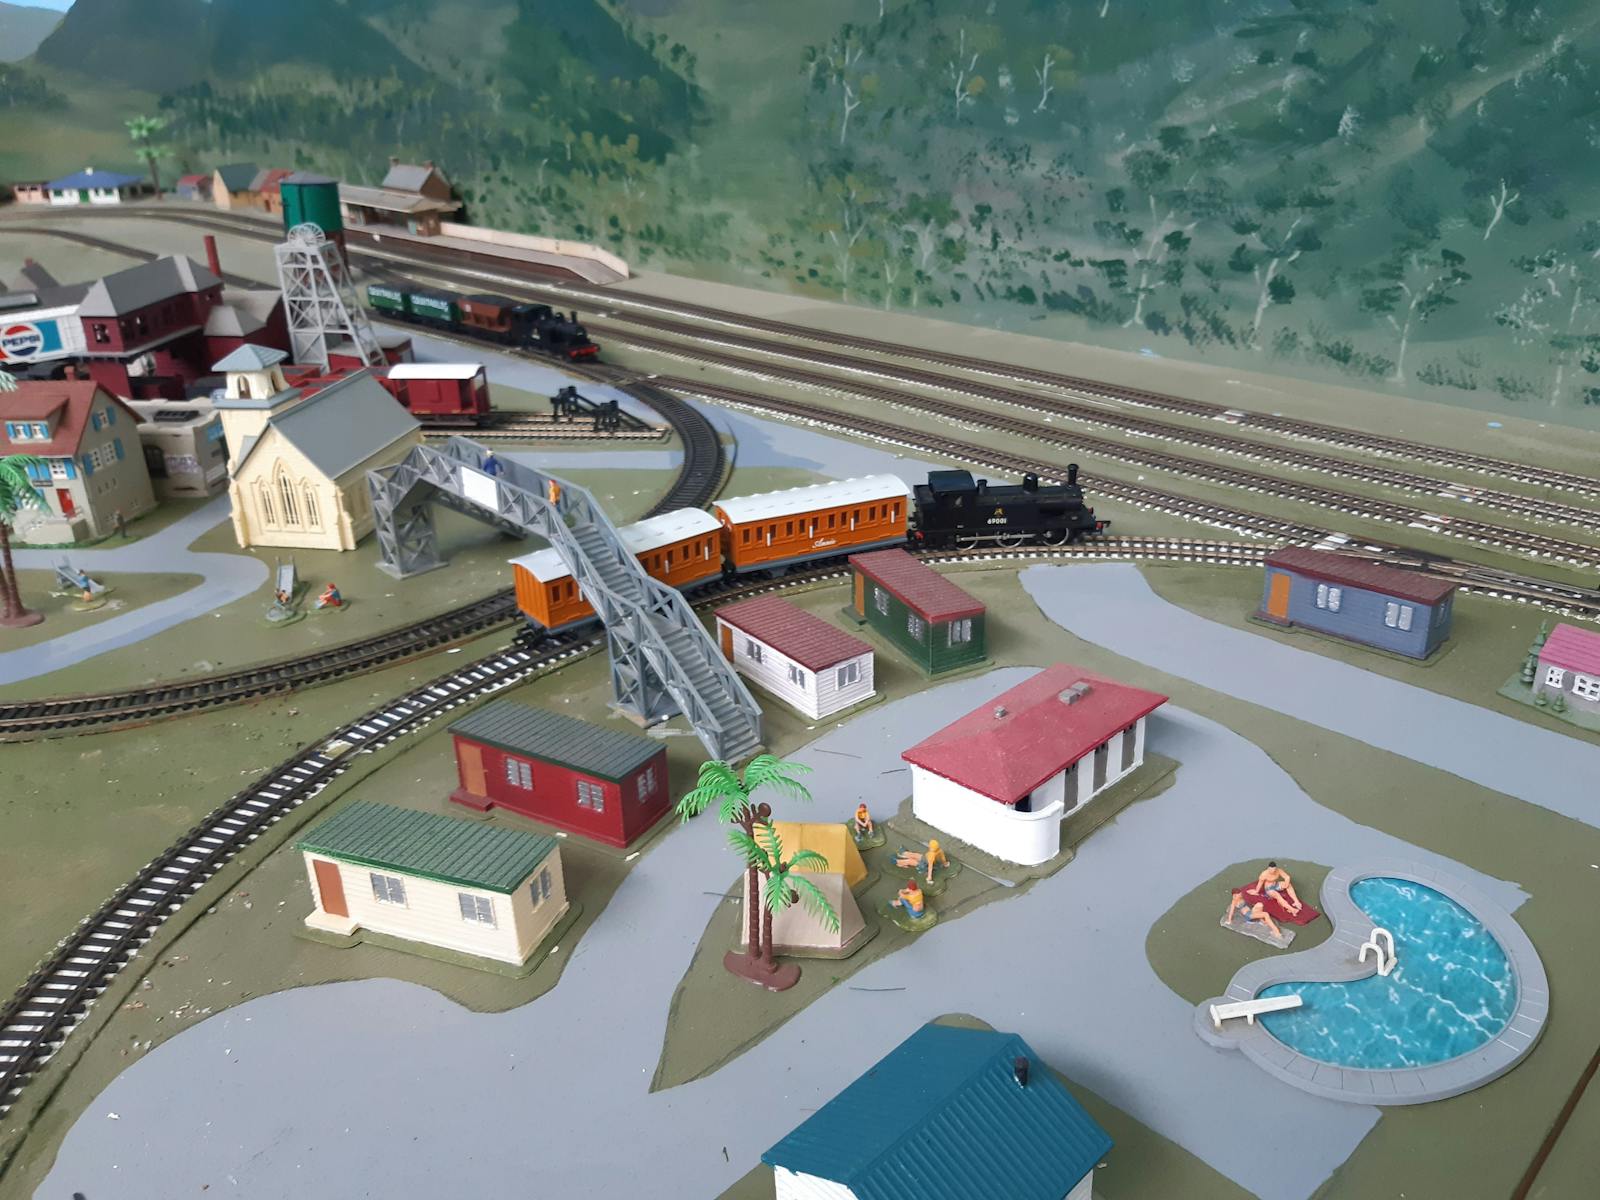 The model railway will keep children and adults enthralled for ages.